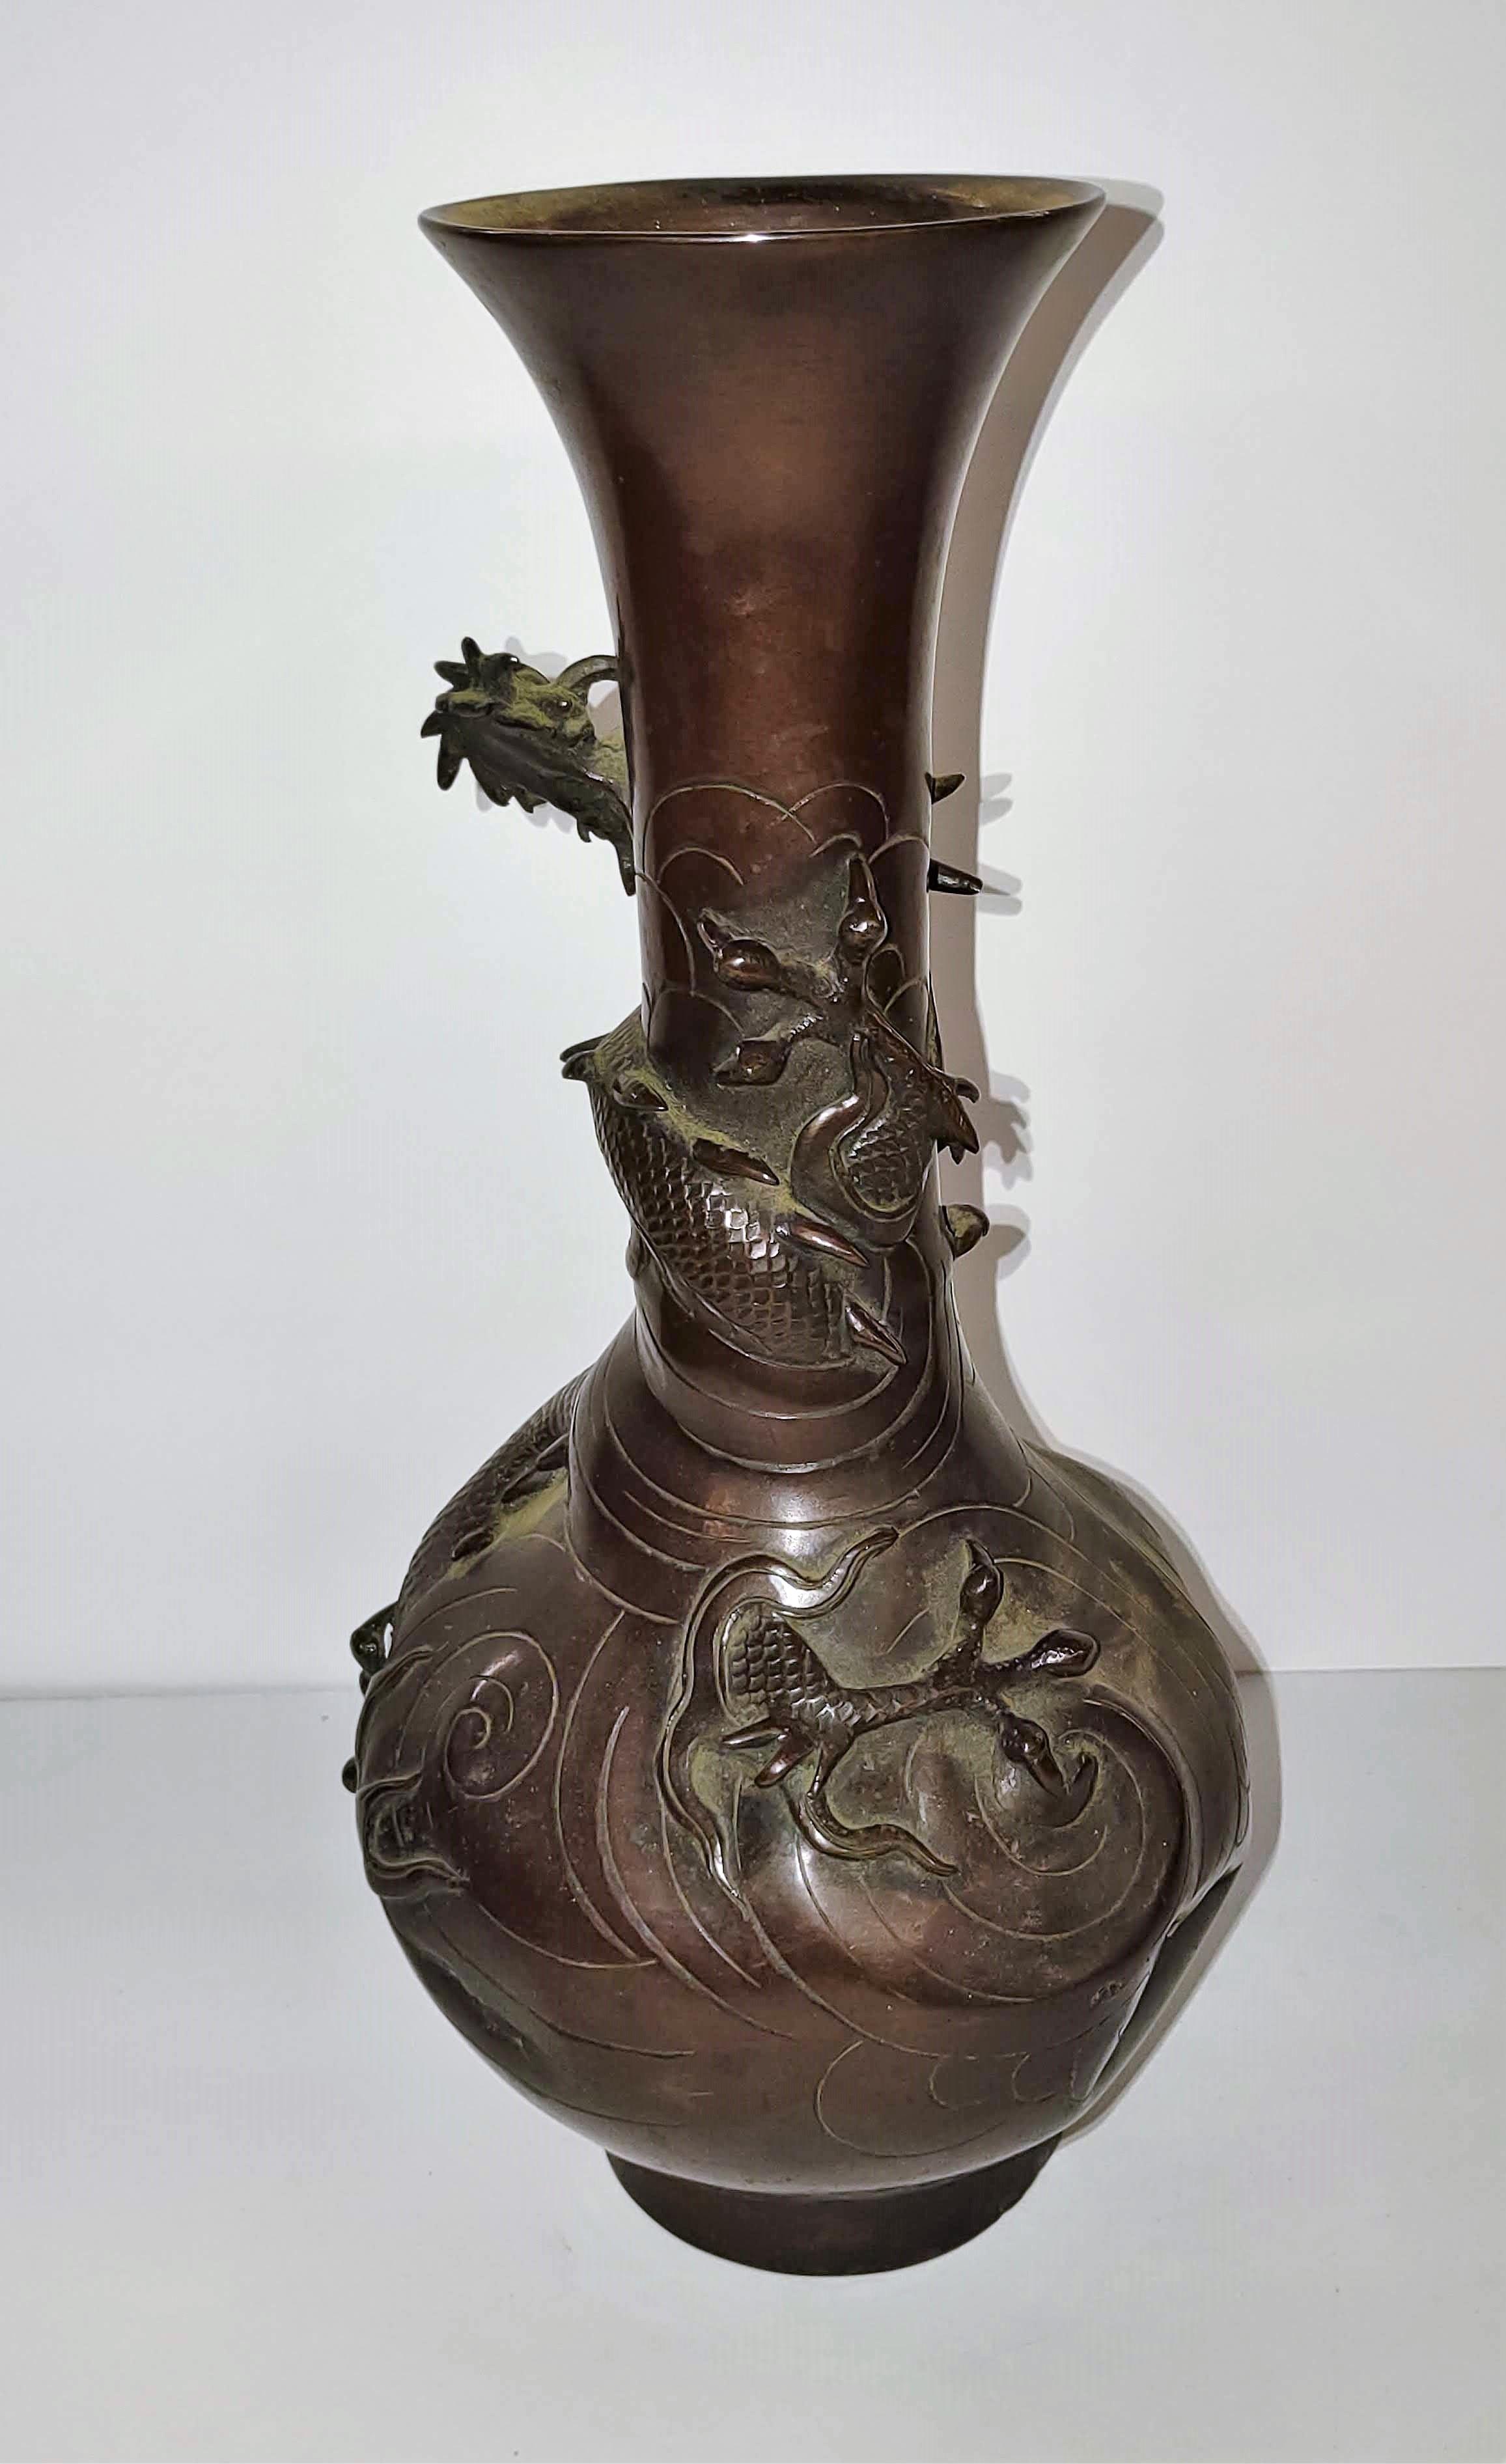 ANTIQUE BRONZE VASE WITH DRAGON ACCENT - DRILLED FOR LAMP